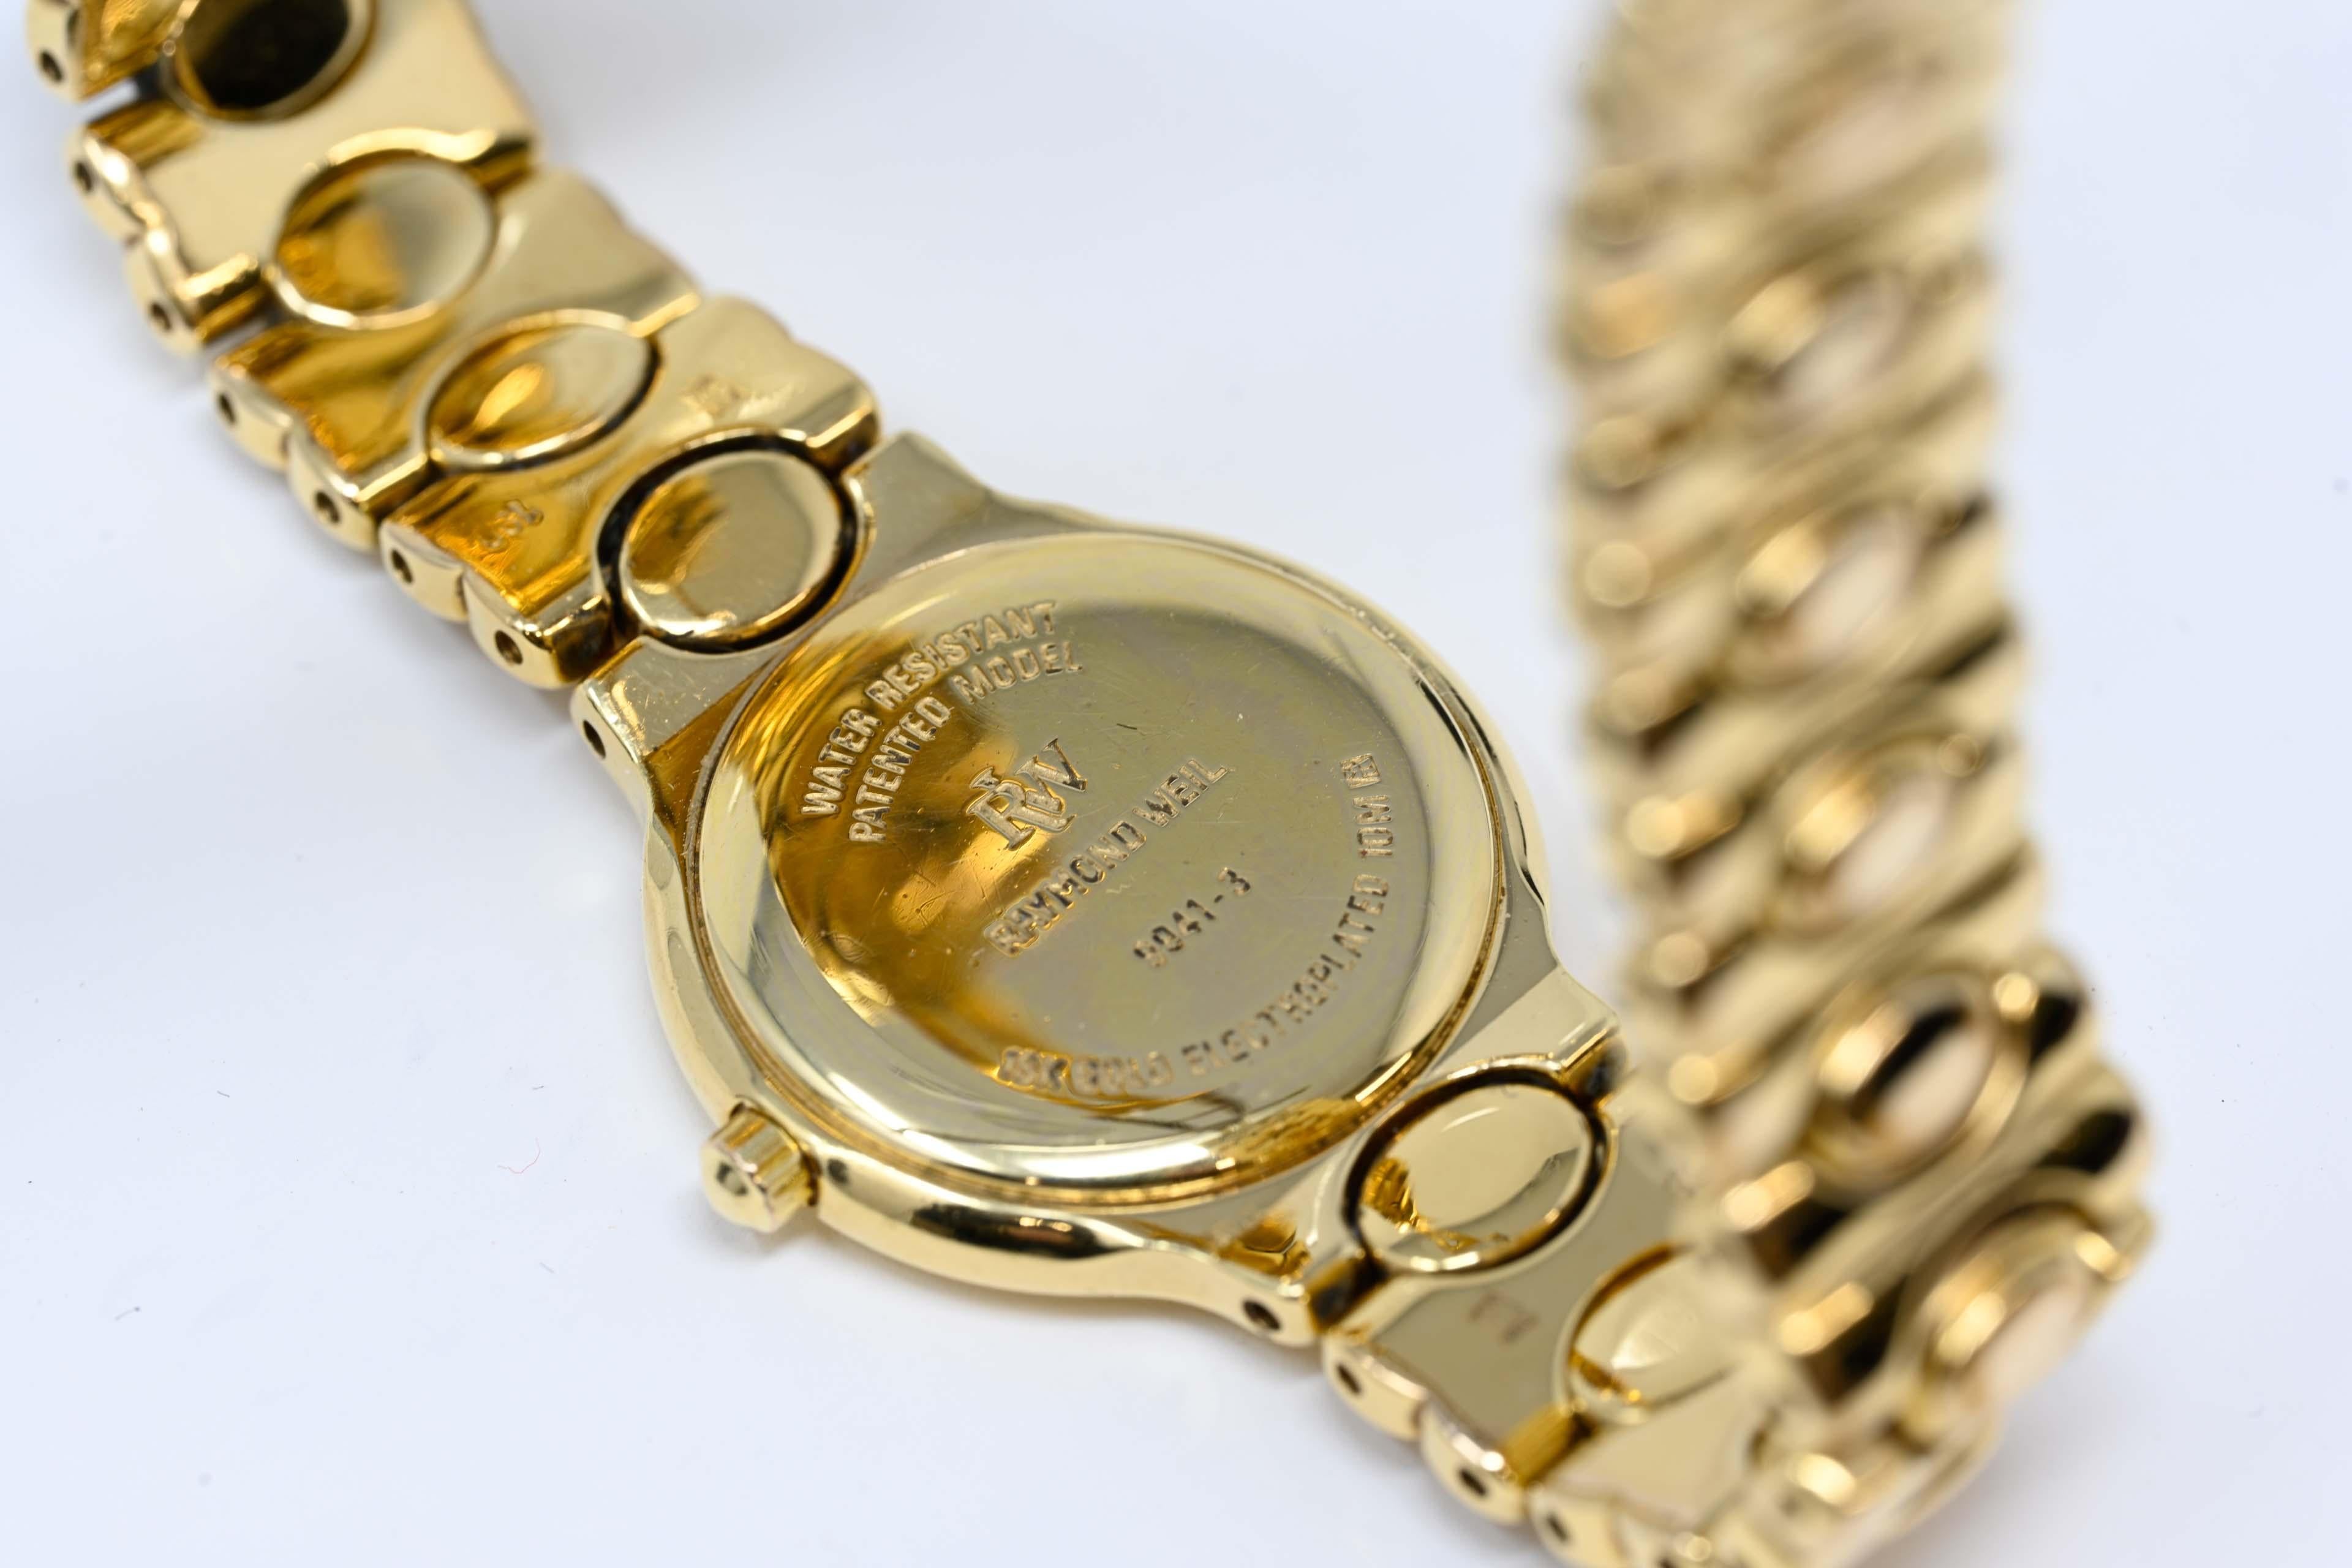 18k electroplated watch